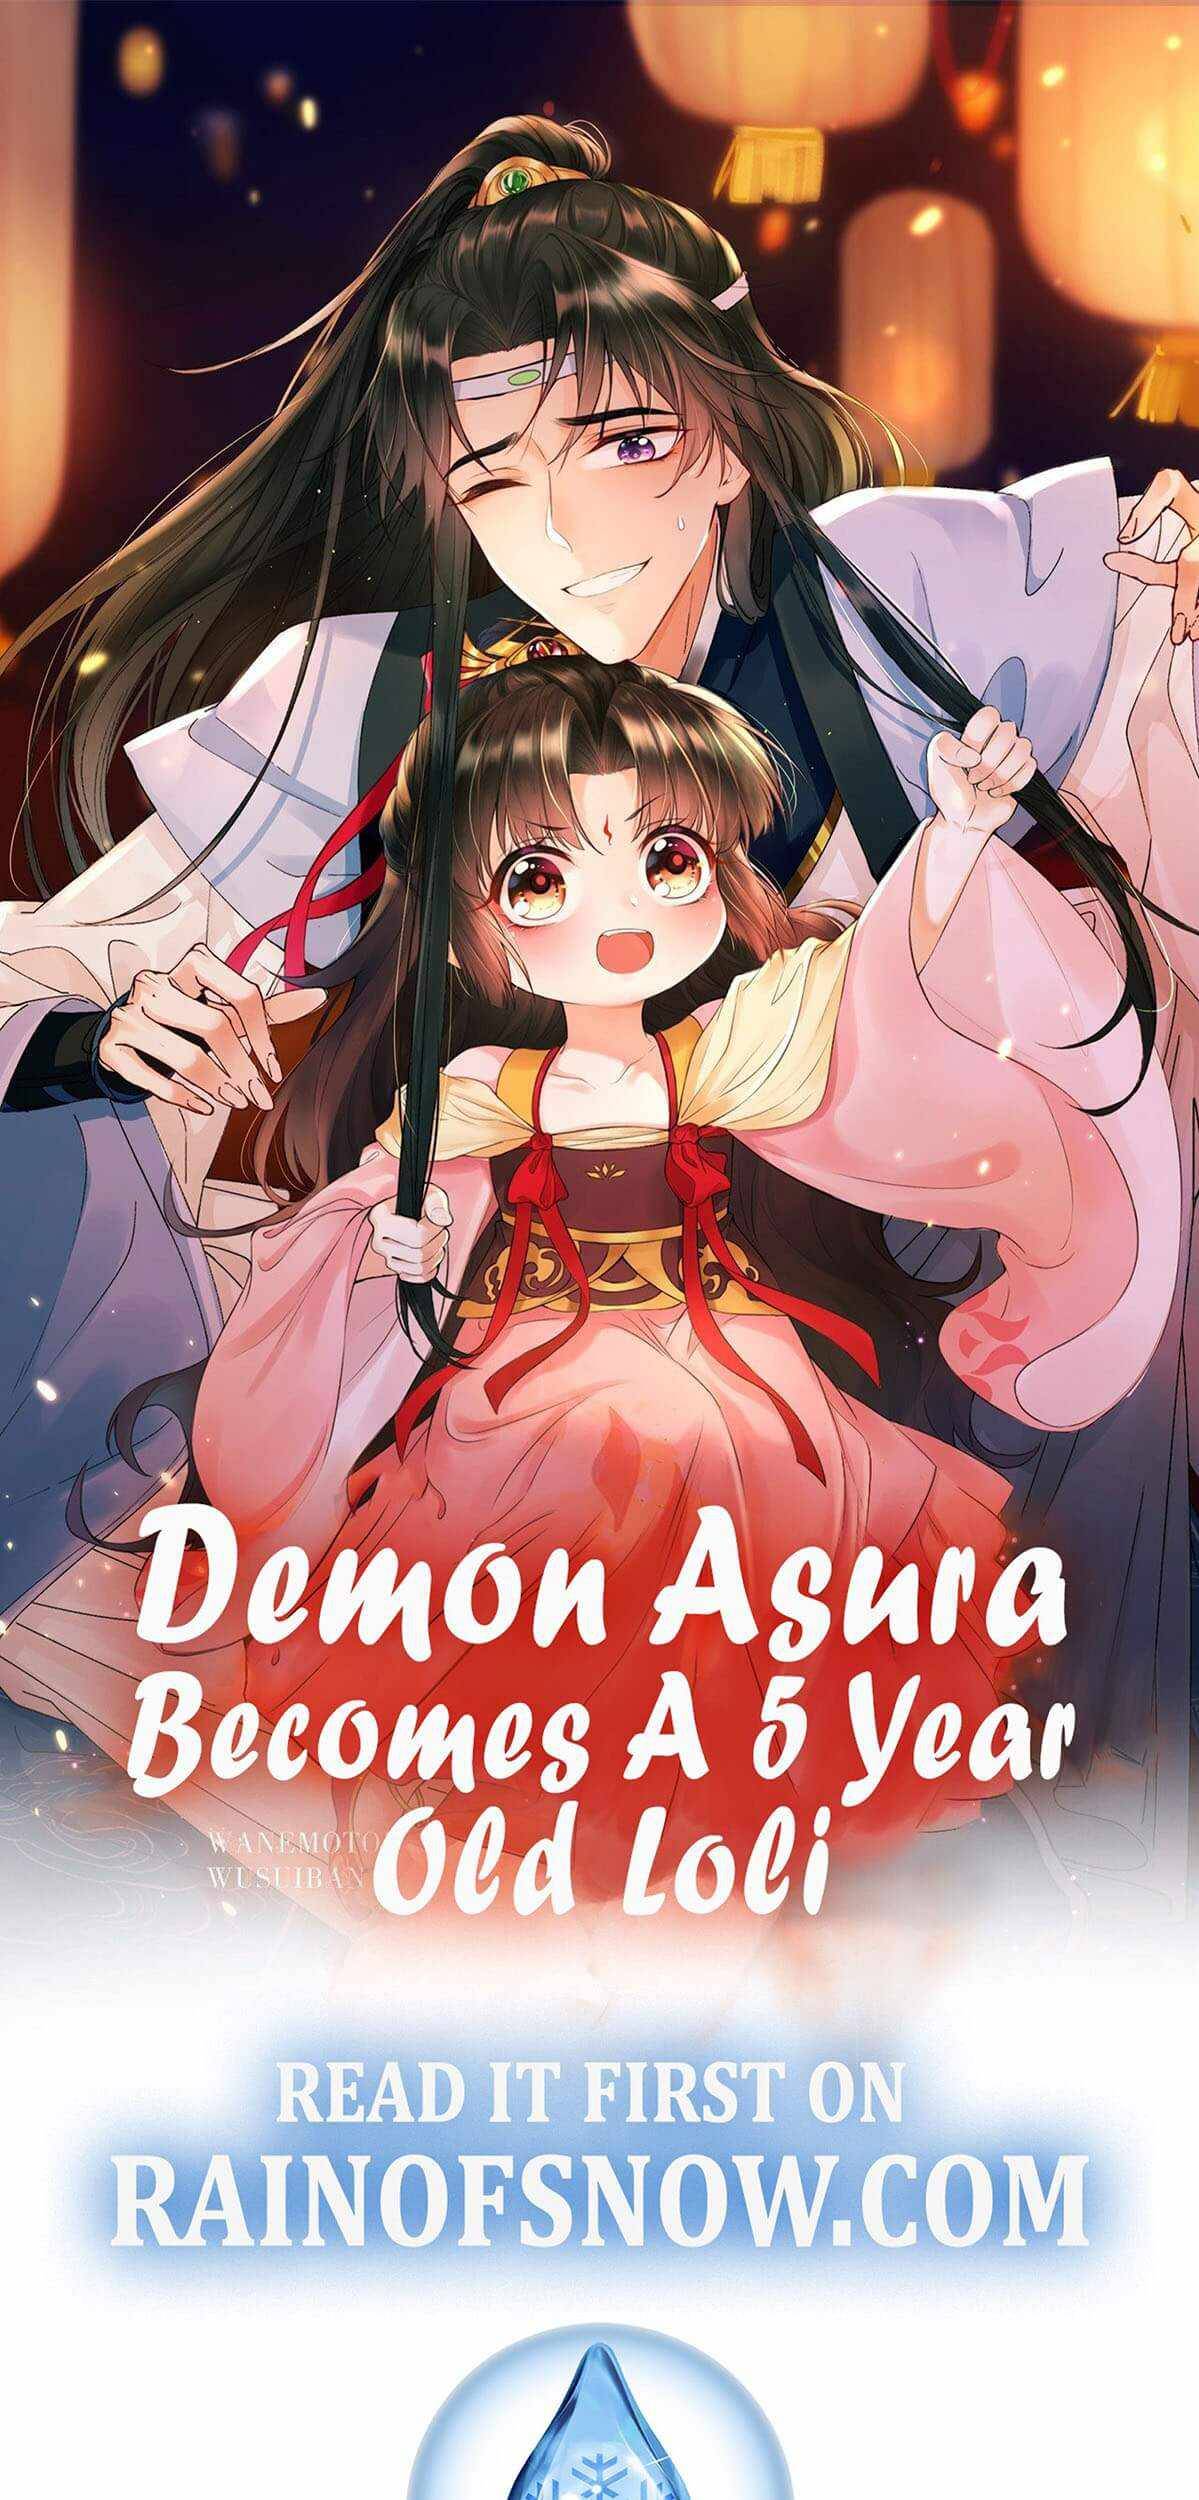 Demon Asura Becomes A 5 Year Old Loli chapter 2